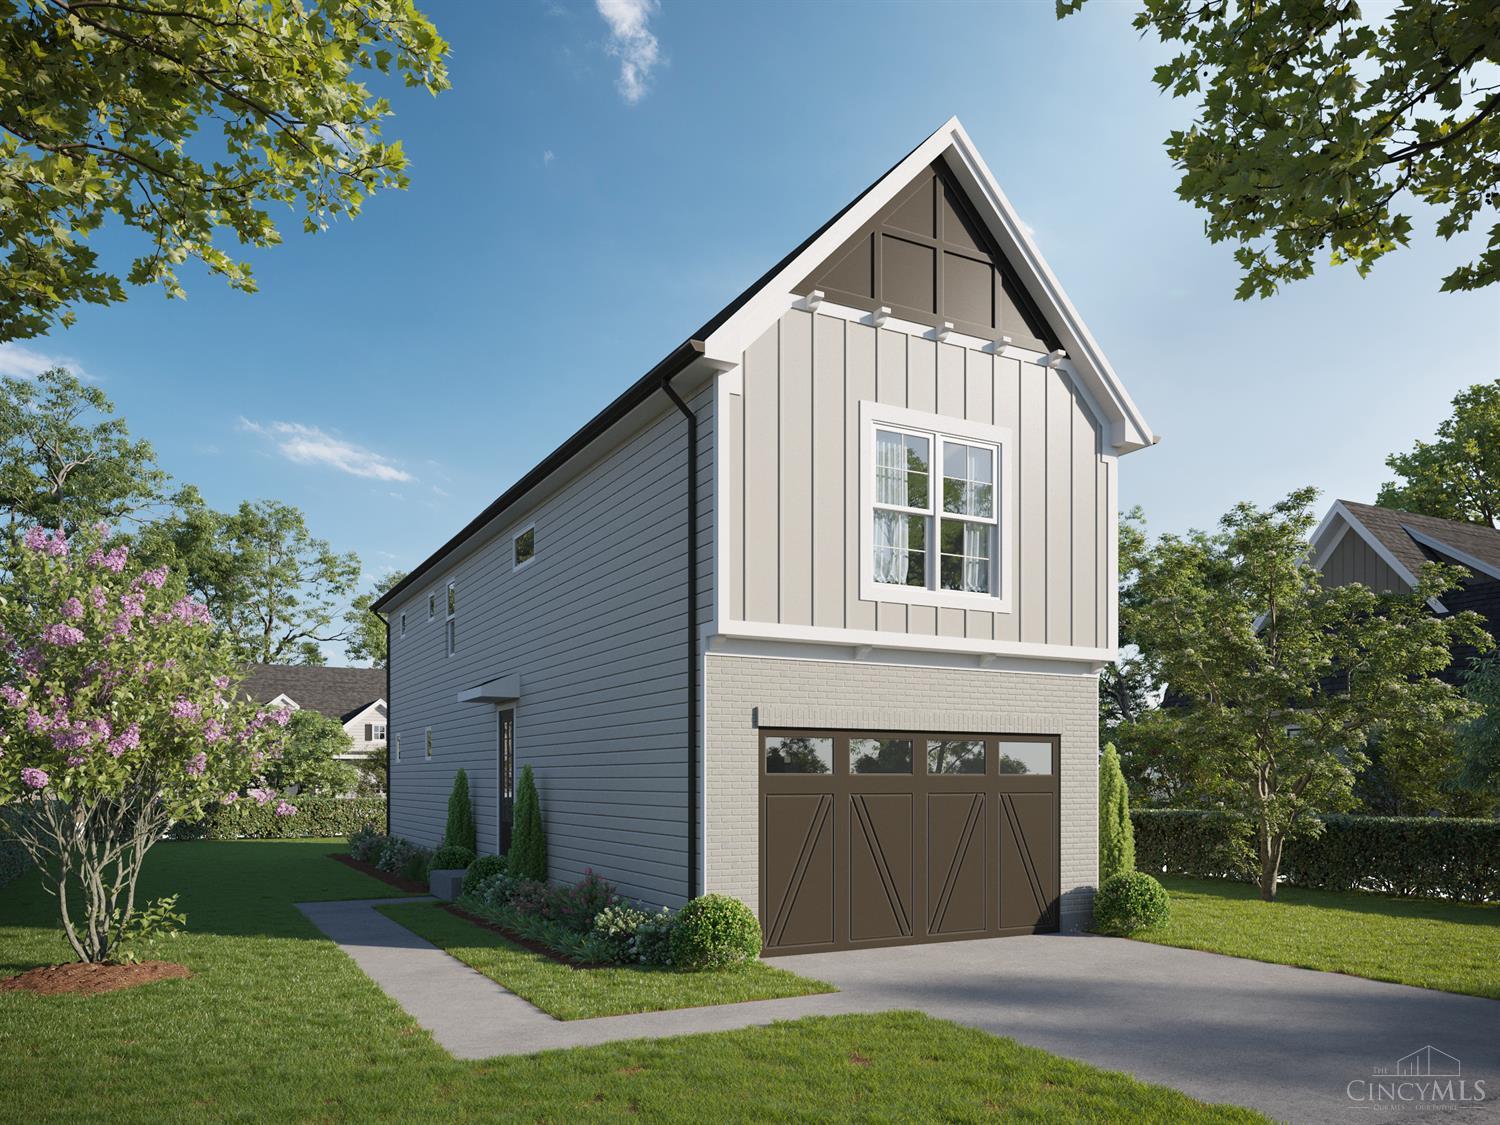 Ashford Homes - 1,759 sq ft open concept floor plan. LEED Gold tax Abatement eligible. Save estimated $12k/yr in prop tax. Walkable to all that O'bryonville has to offer - Bon Bonerie, O'bryons, Bean & Barley, Pampa's, Ripple Wine Bar. Kitchen with island, 42 wall cabinets, quartz counters, stainless appliances. Master ensuite & walk-in closet. 9ft ceilings on the first floor. Rear Patio with park views. Plenty of storage in basement. Basement equipped with egress window and full bath rough-in. Low maintenance home!